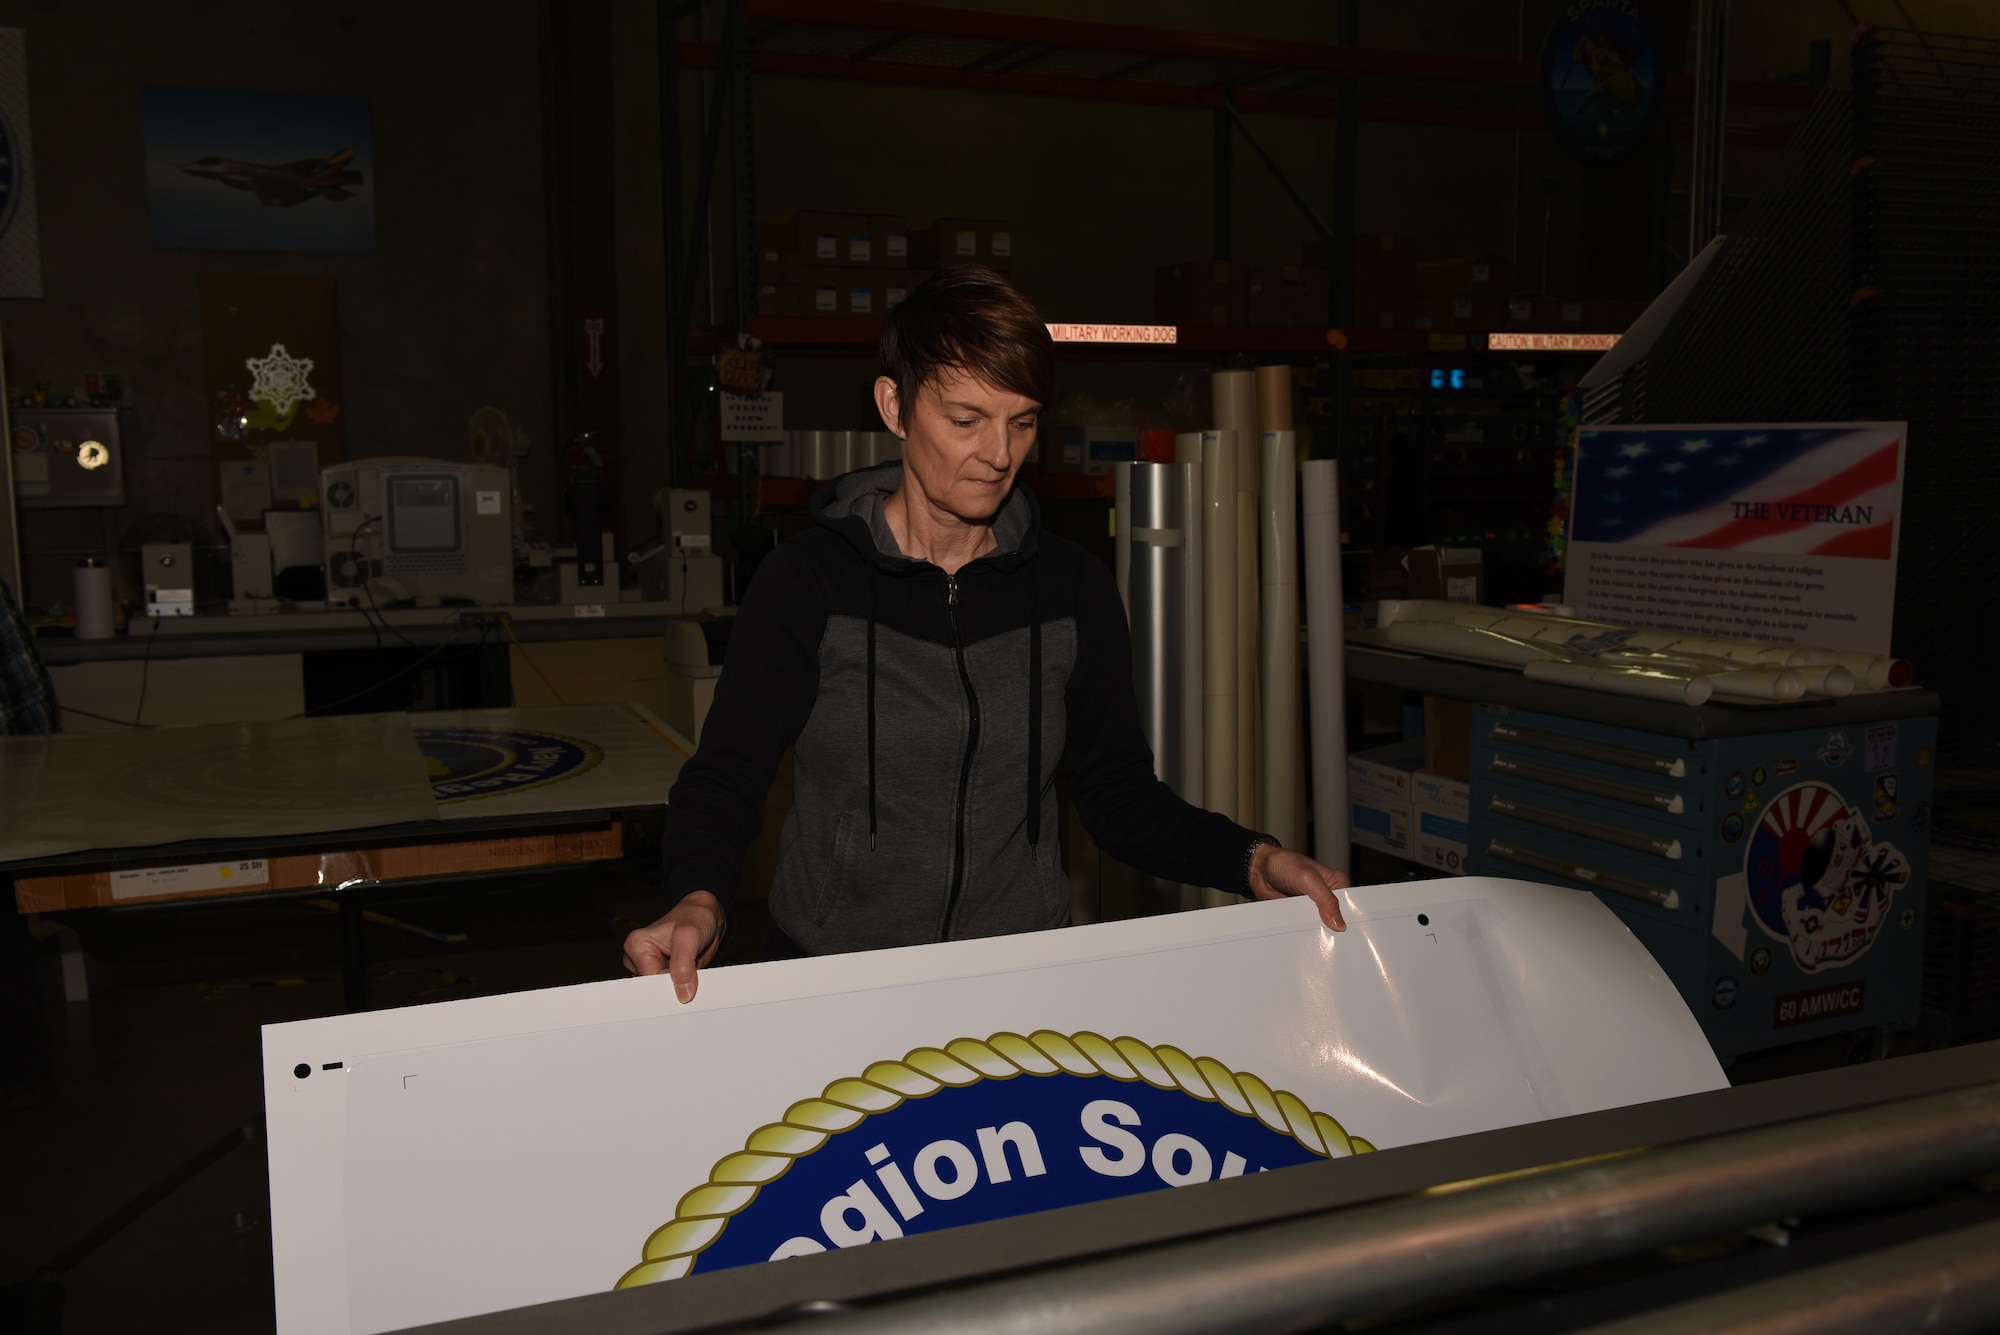 Kathy Kruczek, Defense Logistics Agency Document Automation Production specialist, prepares to cut out large U.S. Navy decals Feb. 7, 2019, at Travis Air Force Base, Calif. Kurczek has worked for DLA full-time since 2008 and has worked at Travis since 1993. The Travus DLA facility provides a variety of printing services to federal agencies and government offices. (U.S. Air Force photo by Tech. Sgt. James Hodgman)